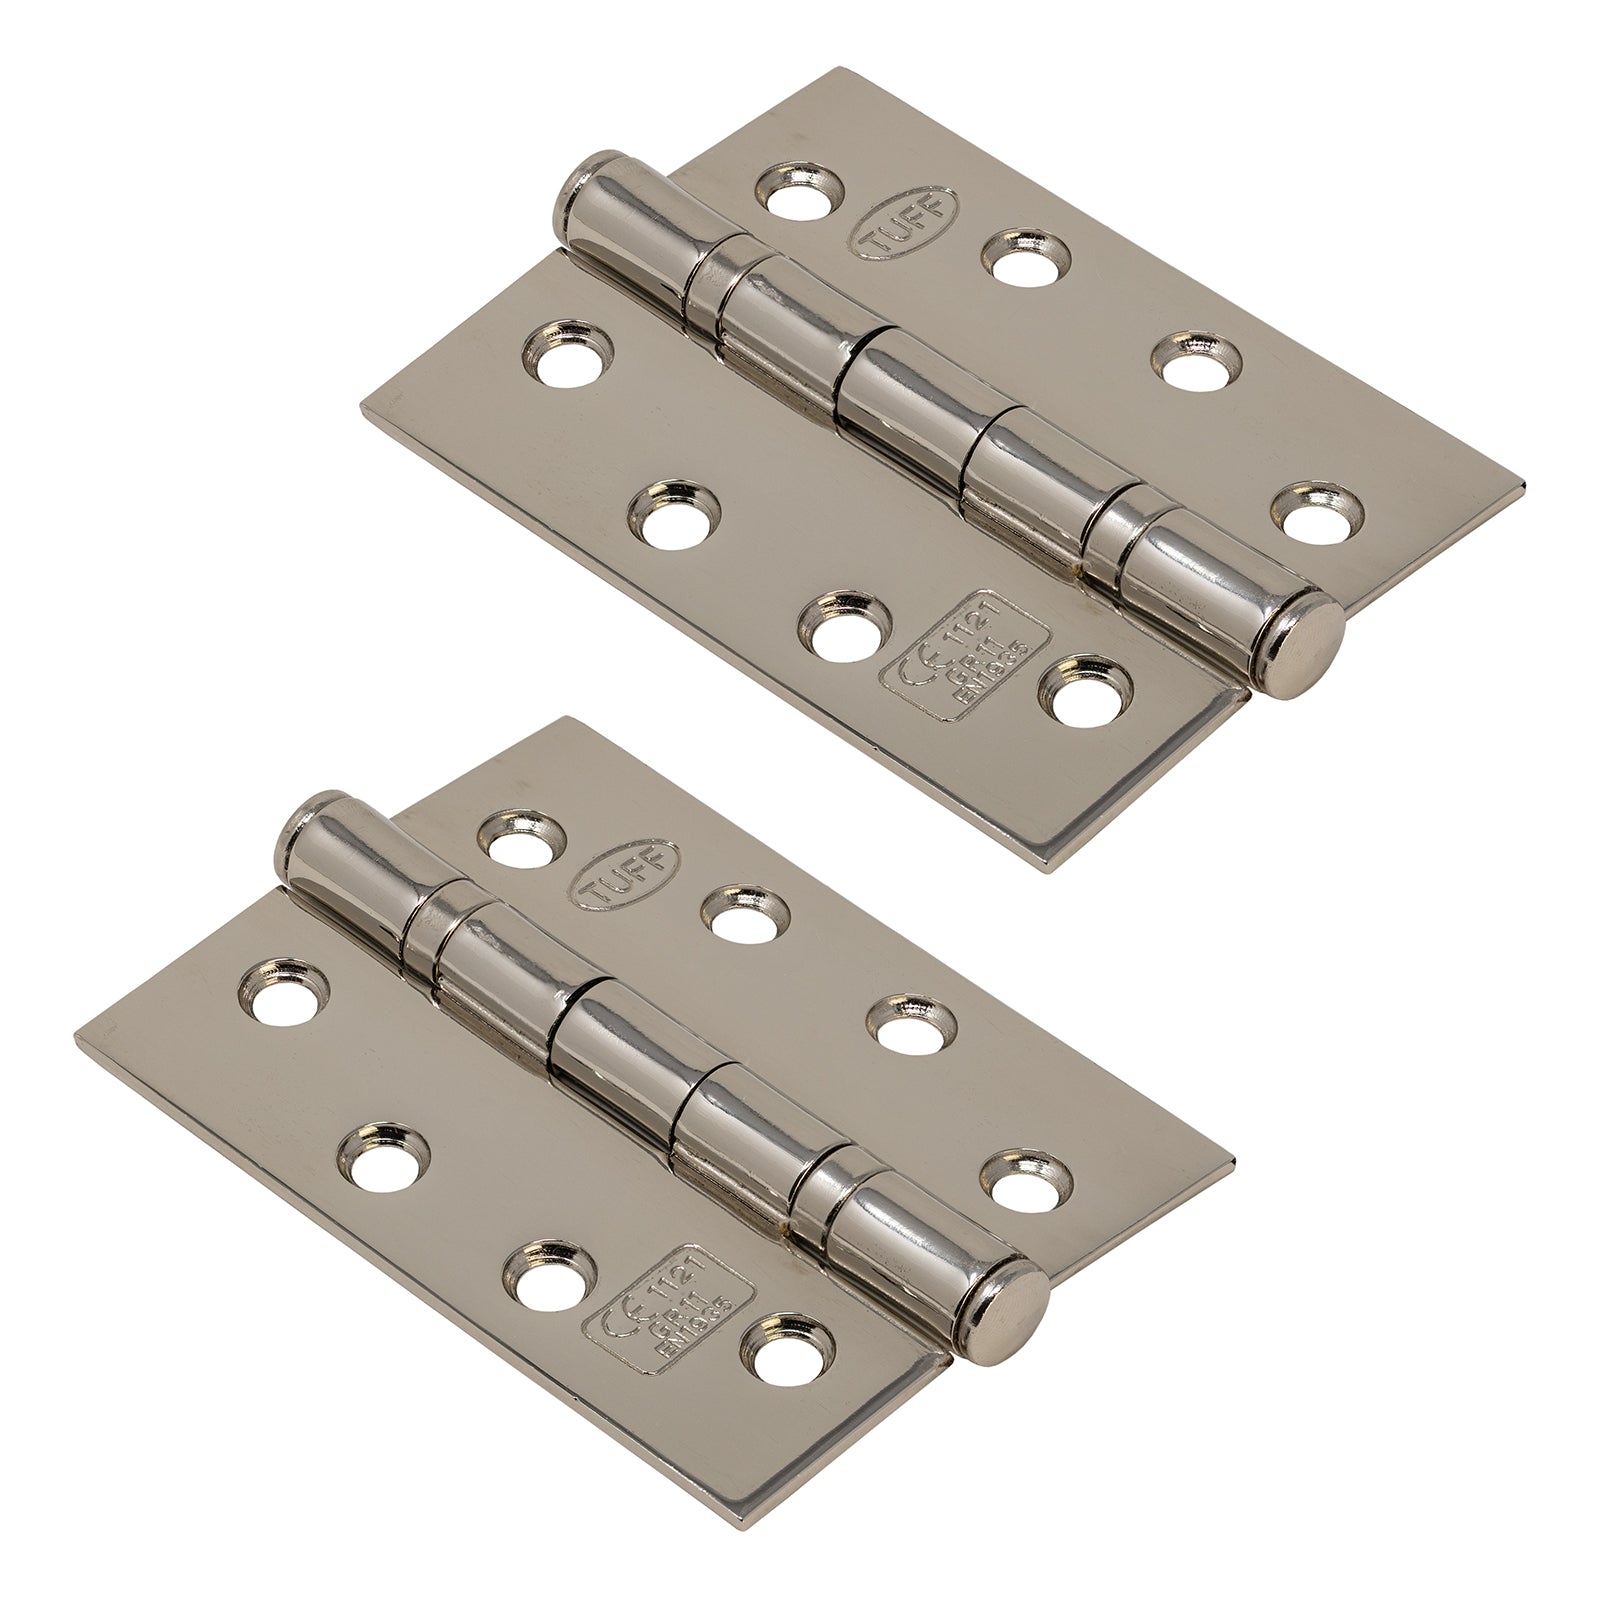 Nickel fire rated 4 inch butt hinges SHOW